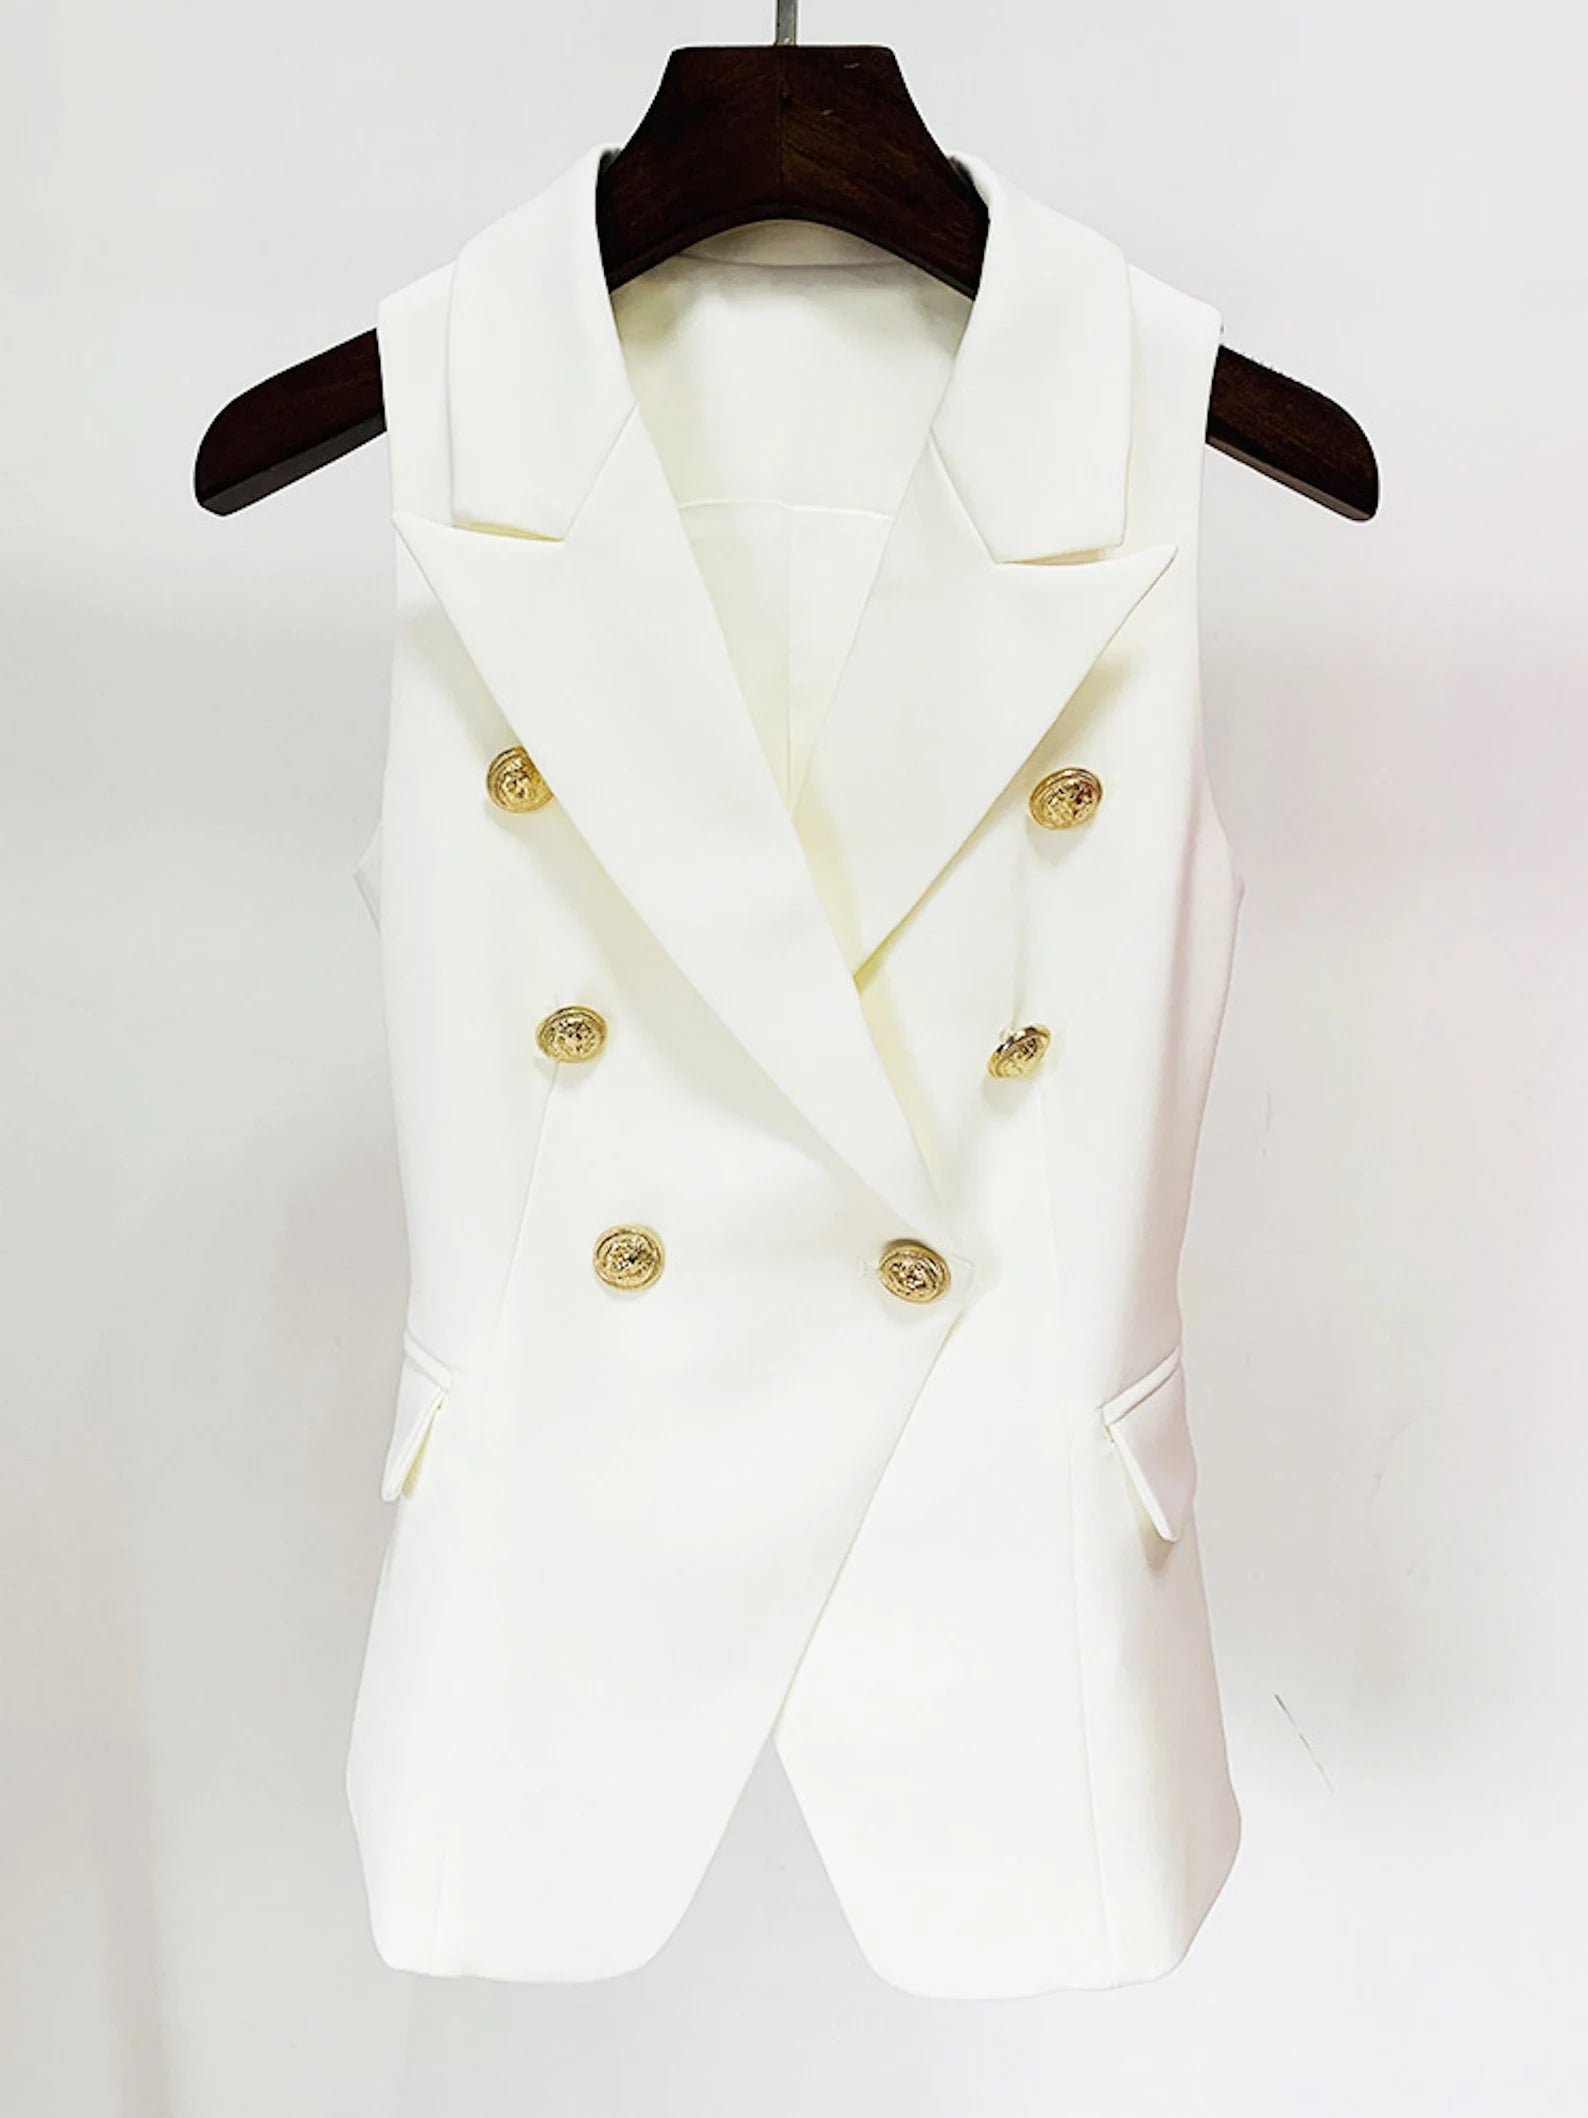 Women's Golden Lion Buttons Fitted Blazer Style Vest White  Gold-tone buttons provide a touch of nautical appeal to this blazer, while the ponte fabric gives it a comfortable yet polished style for classy to elegant for your professional everyday office work. Casual, work, business travels, meetings, formal, dinner dates, hangouts, and other special events are all appropriate occasions.